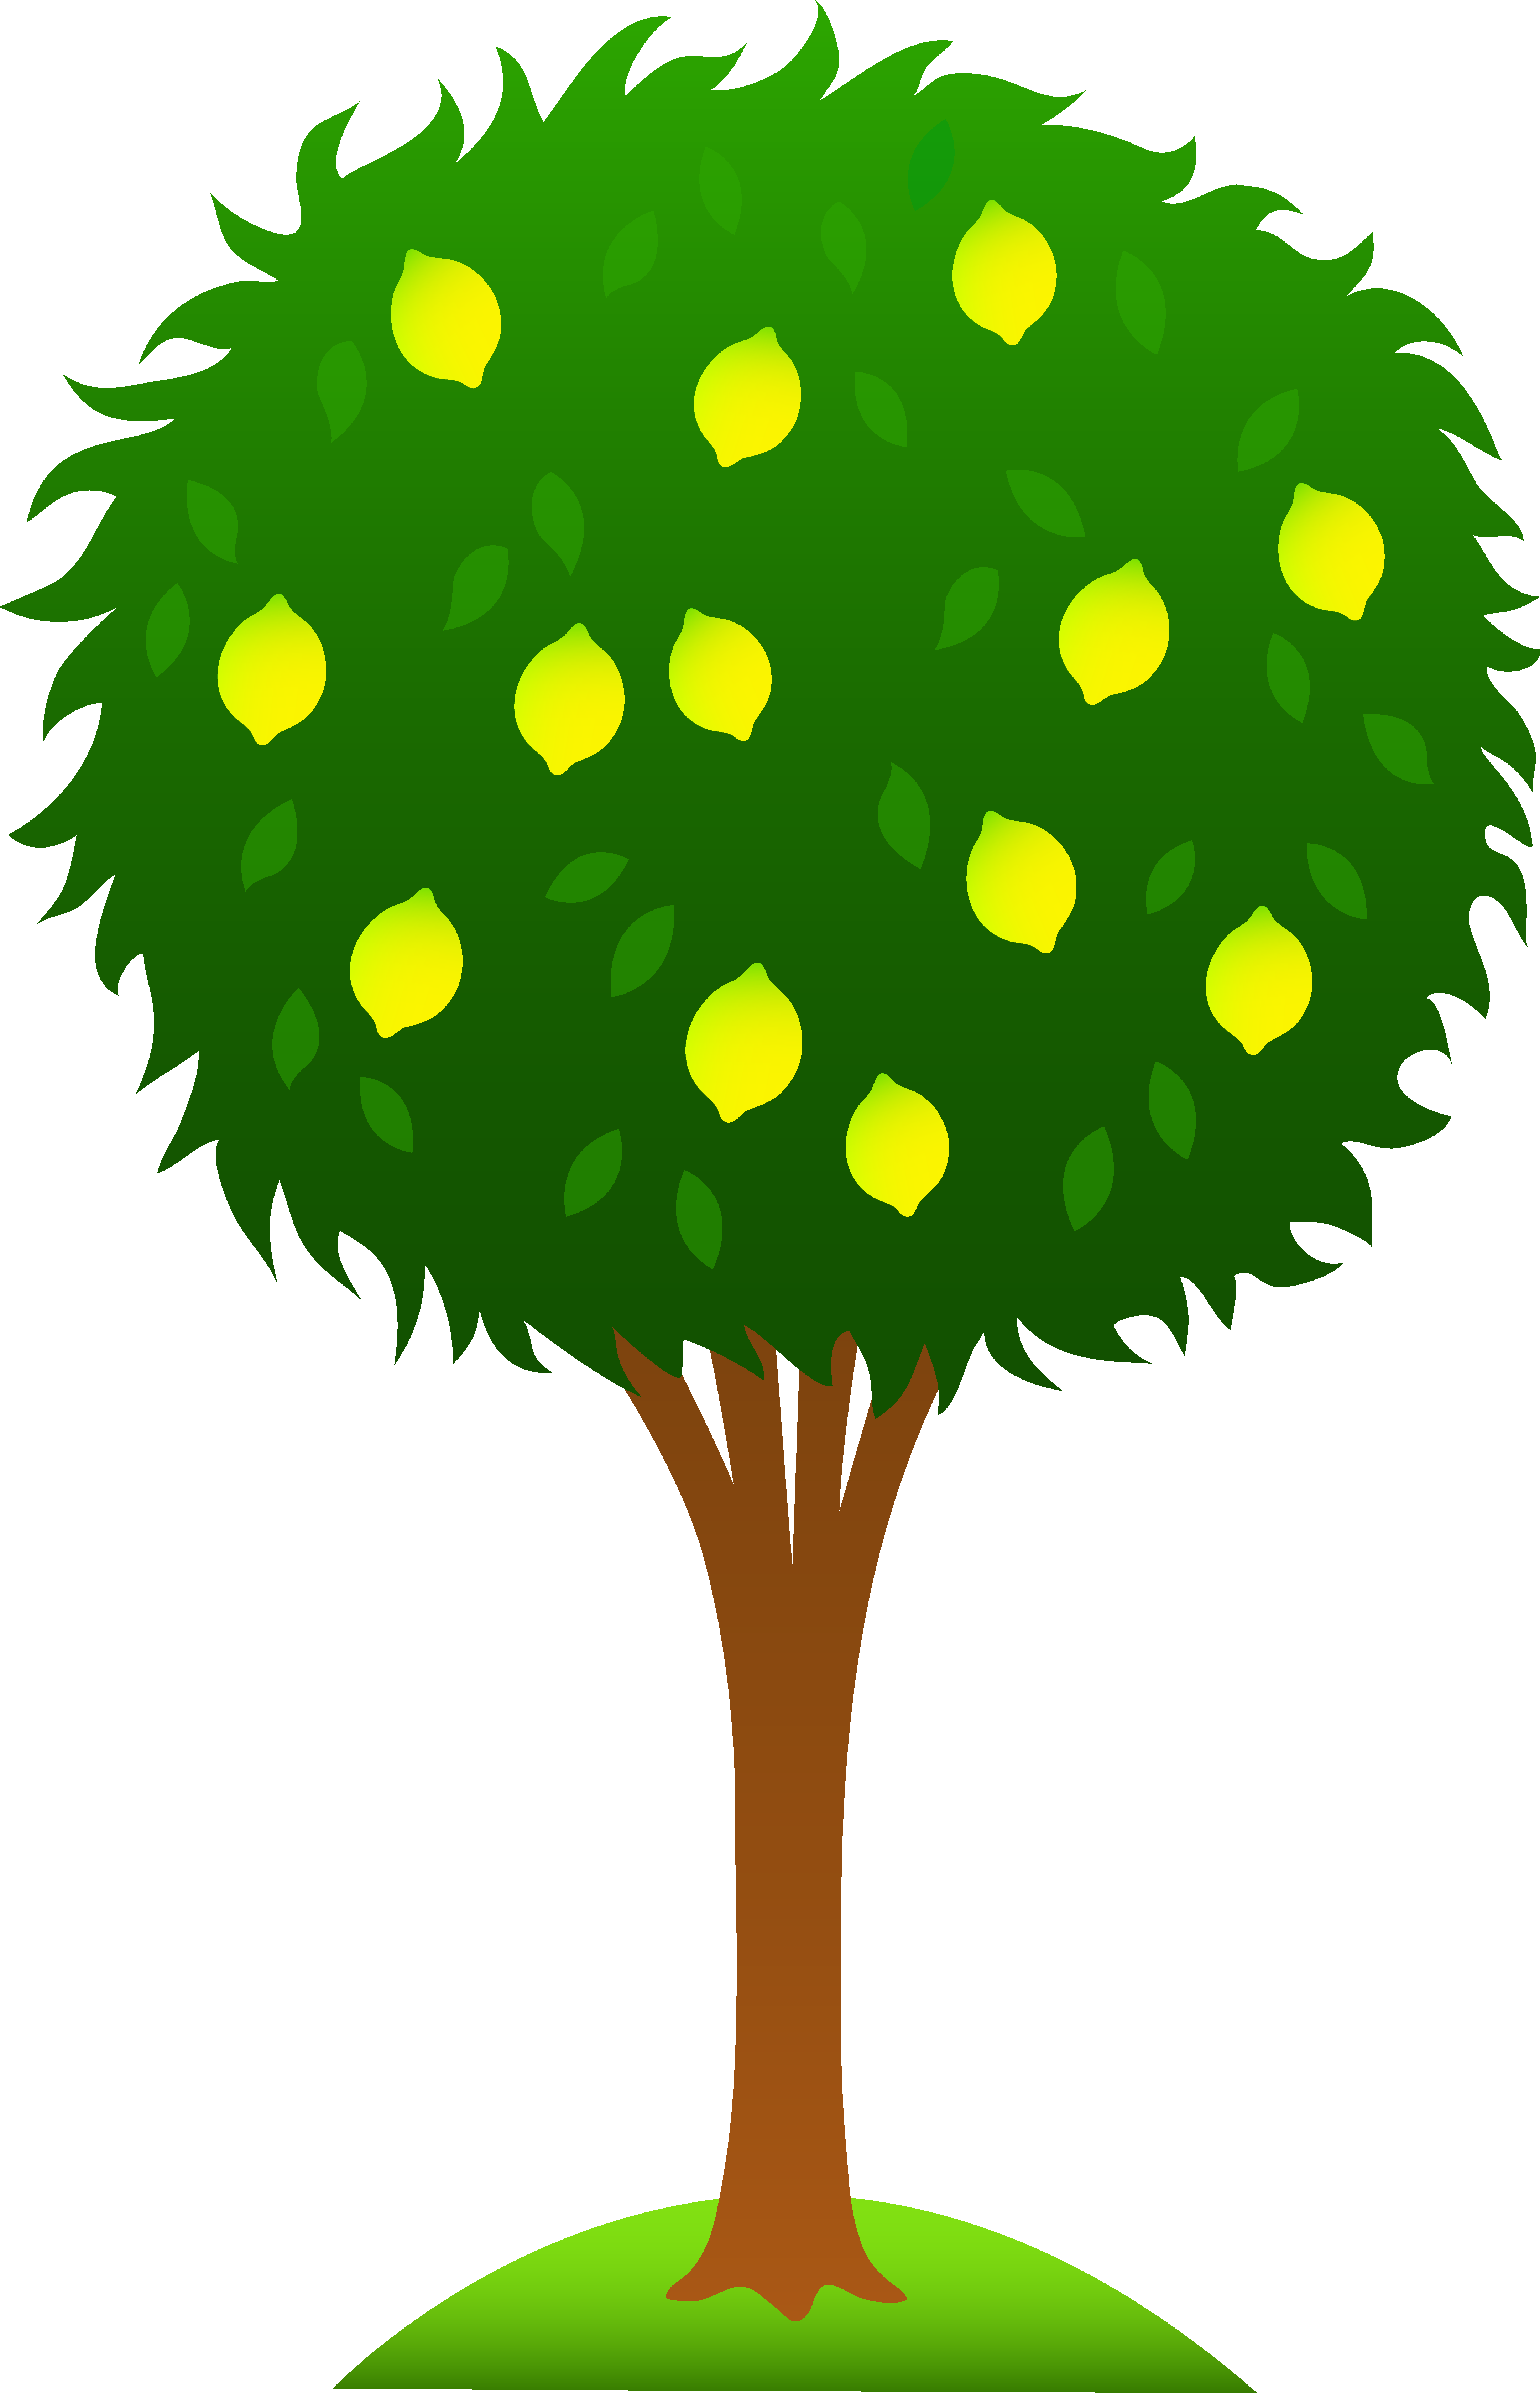 Bare tree clipart free clipart images 2 clipartcow